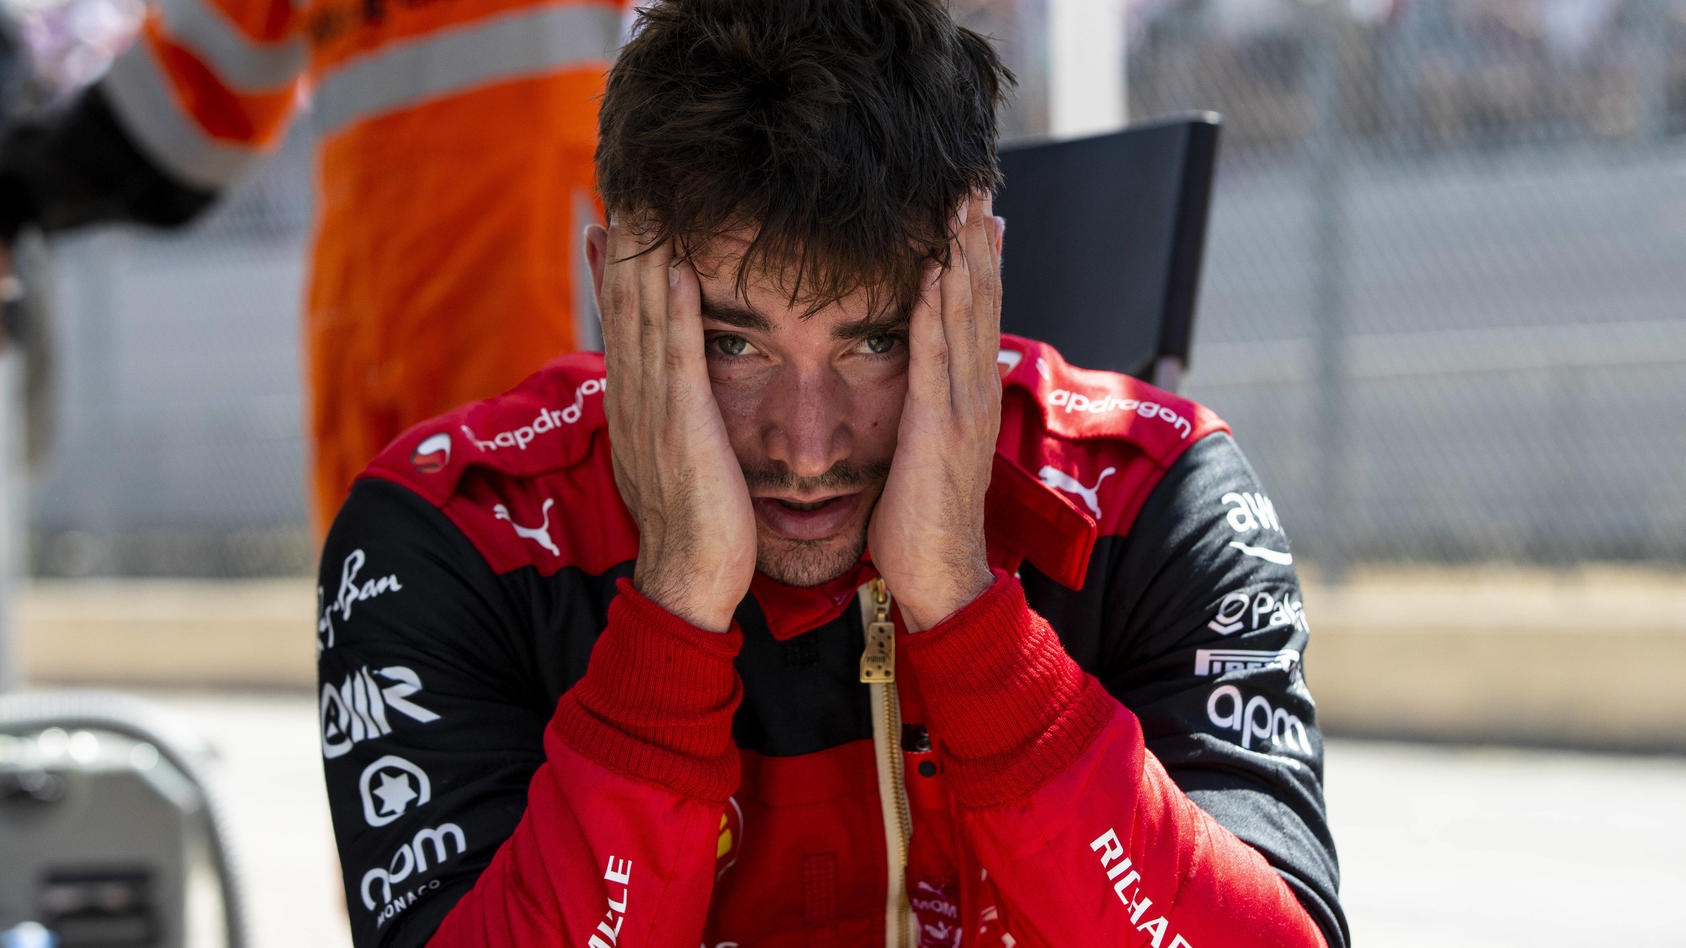  Formula 1 2022: French GP CIRCUIT PAUL RICARD, FRANCE - JULY 24: A despondent Charles Leclerc, Ferrari F1-75, after crashing out of the lead at Le Beausset during the French GP at Circuit Paul Ricard on Sunday July 24, 2022 in Le Castellet, France. 